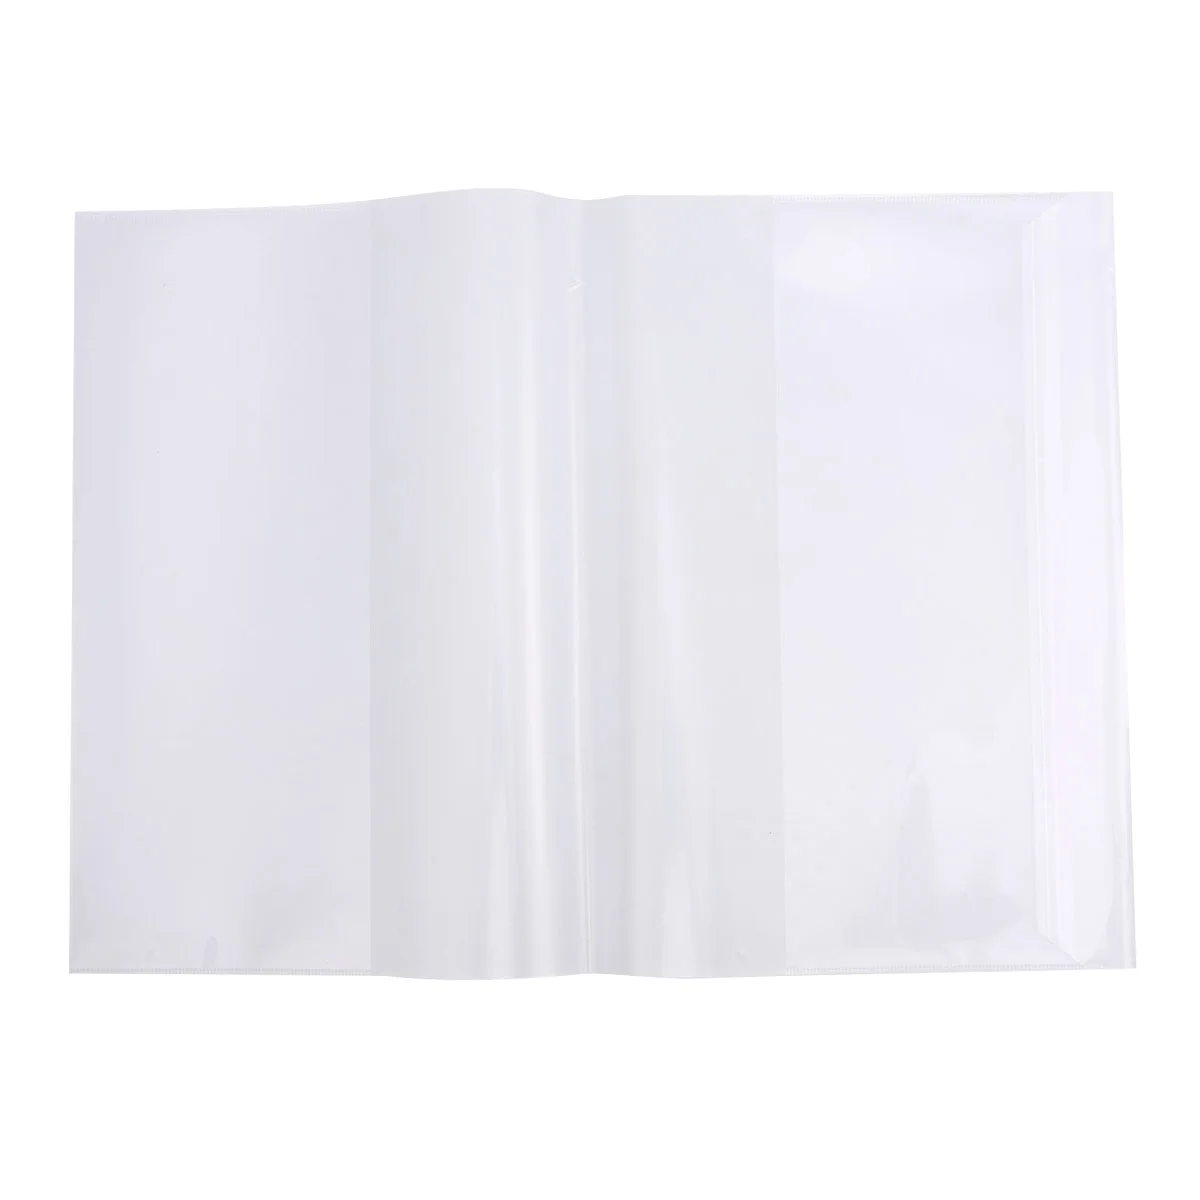 

16K Textbook Cover Clear Waterproof Plastic Exercise Book Note Book Film Protector